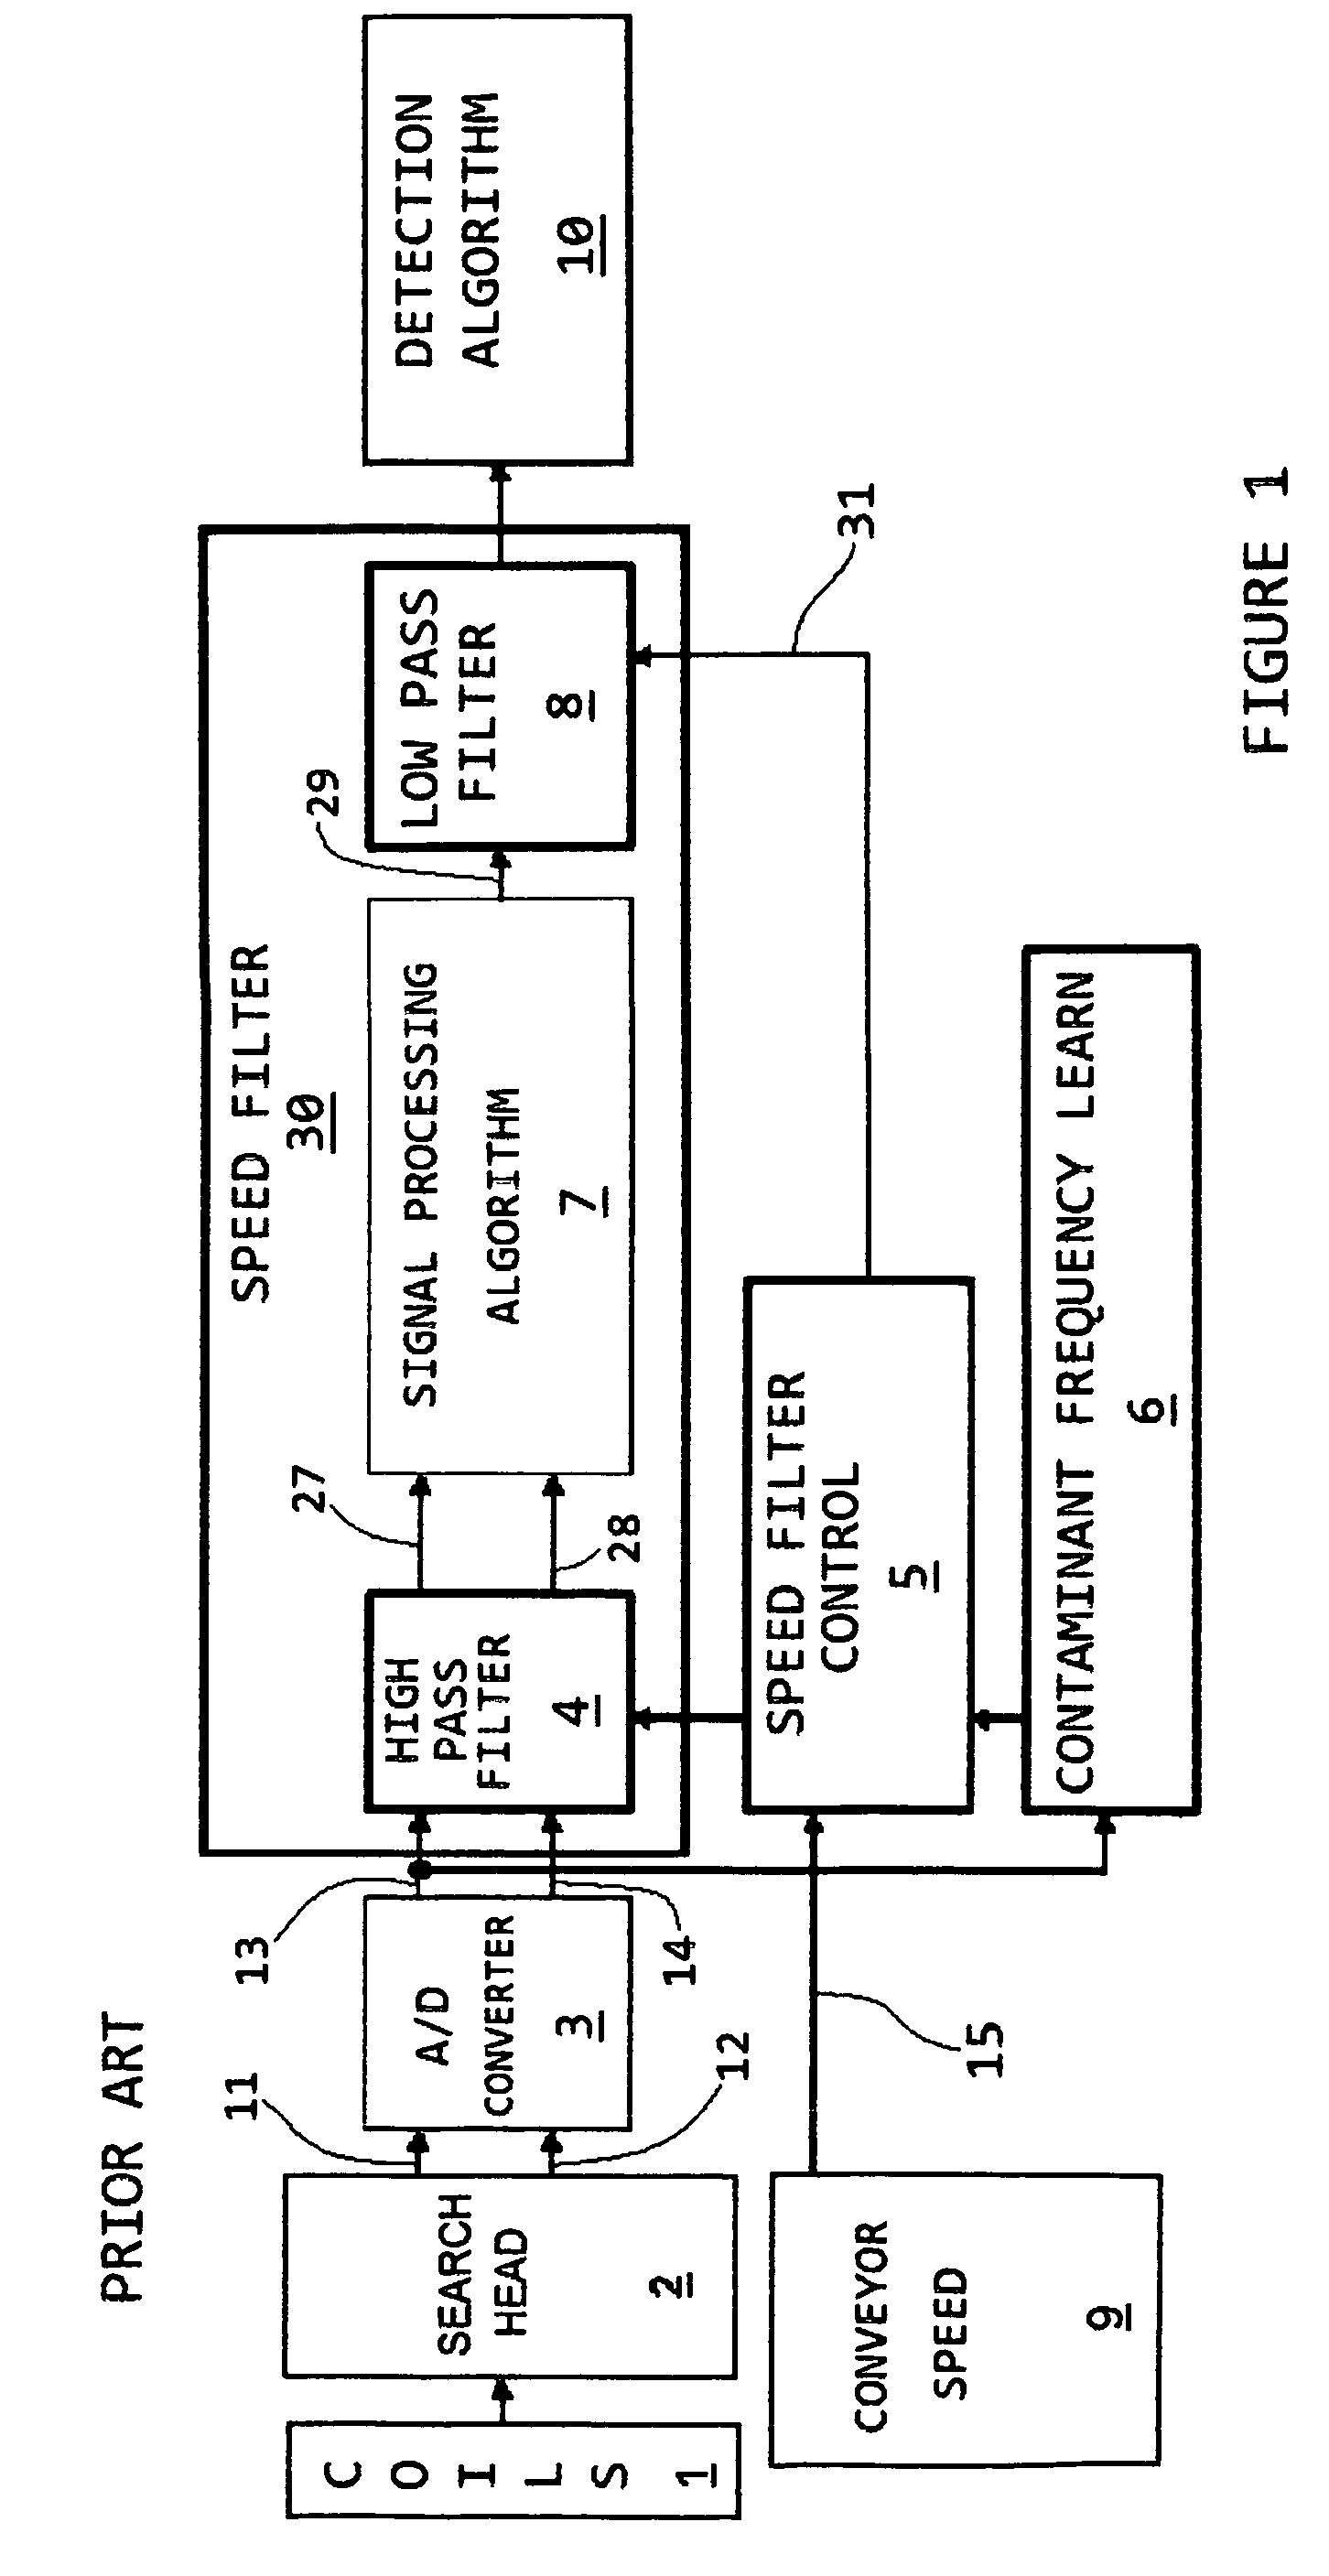 Apparatus and method for automatic product effect compensation in radio frequency metal detectors